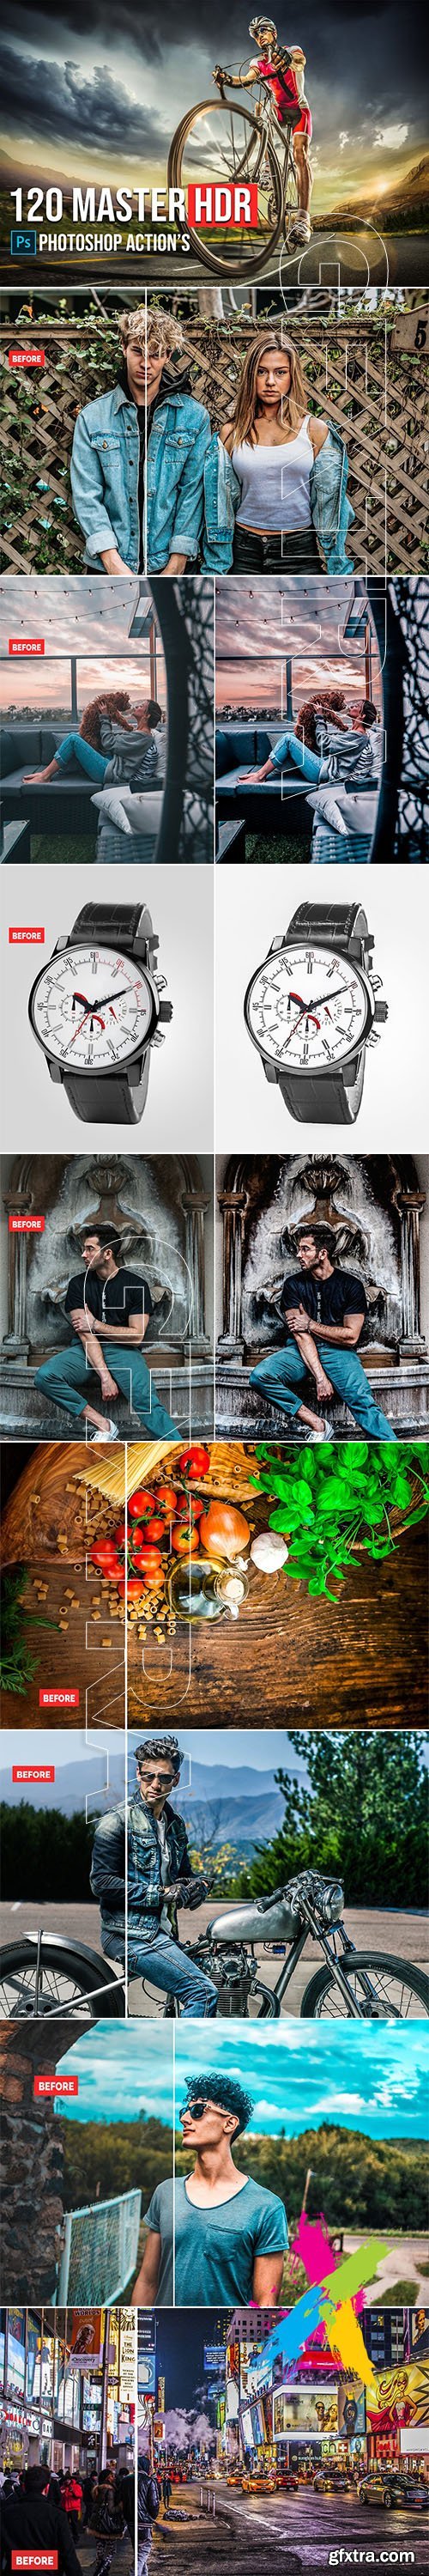 CreativeMarket - 120 Master HDR Photoshop Actions 5783739